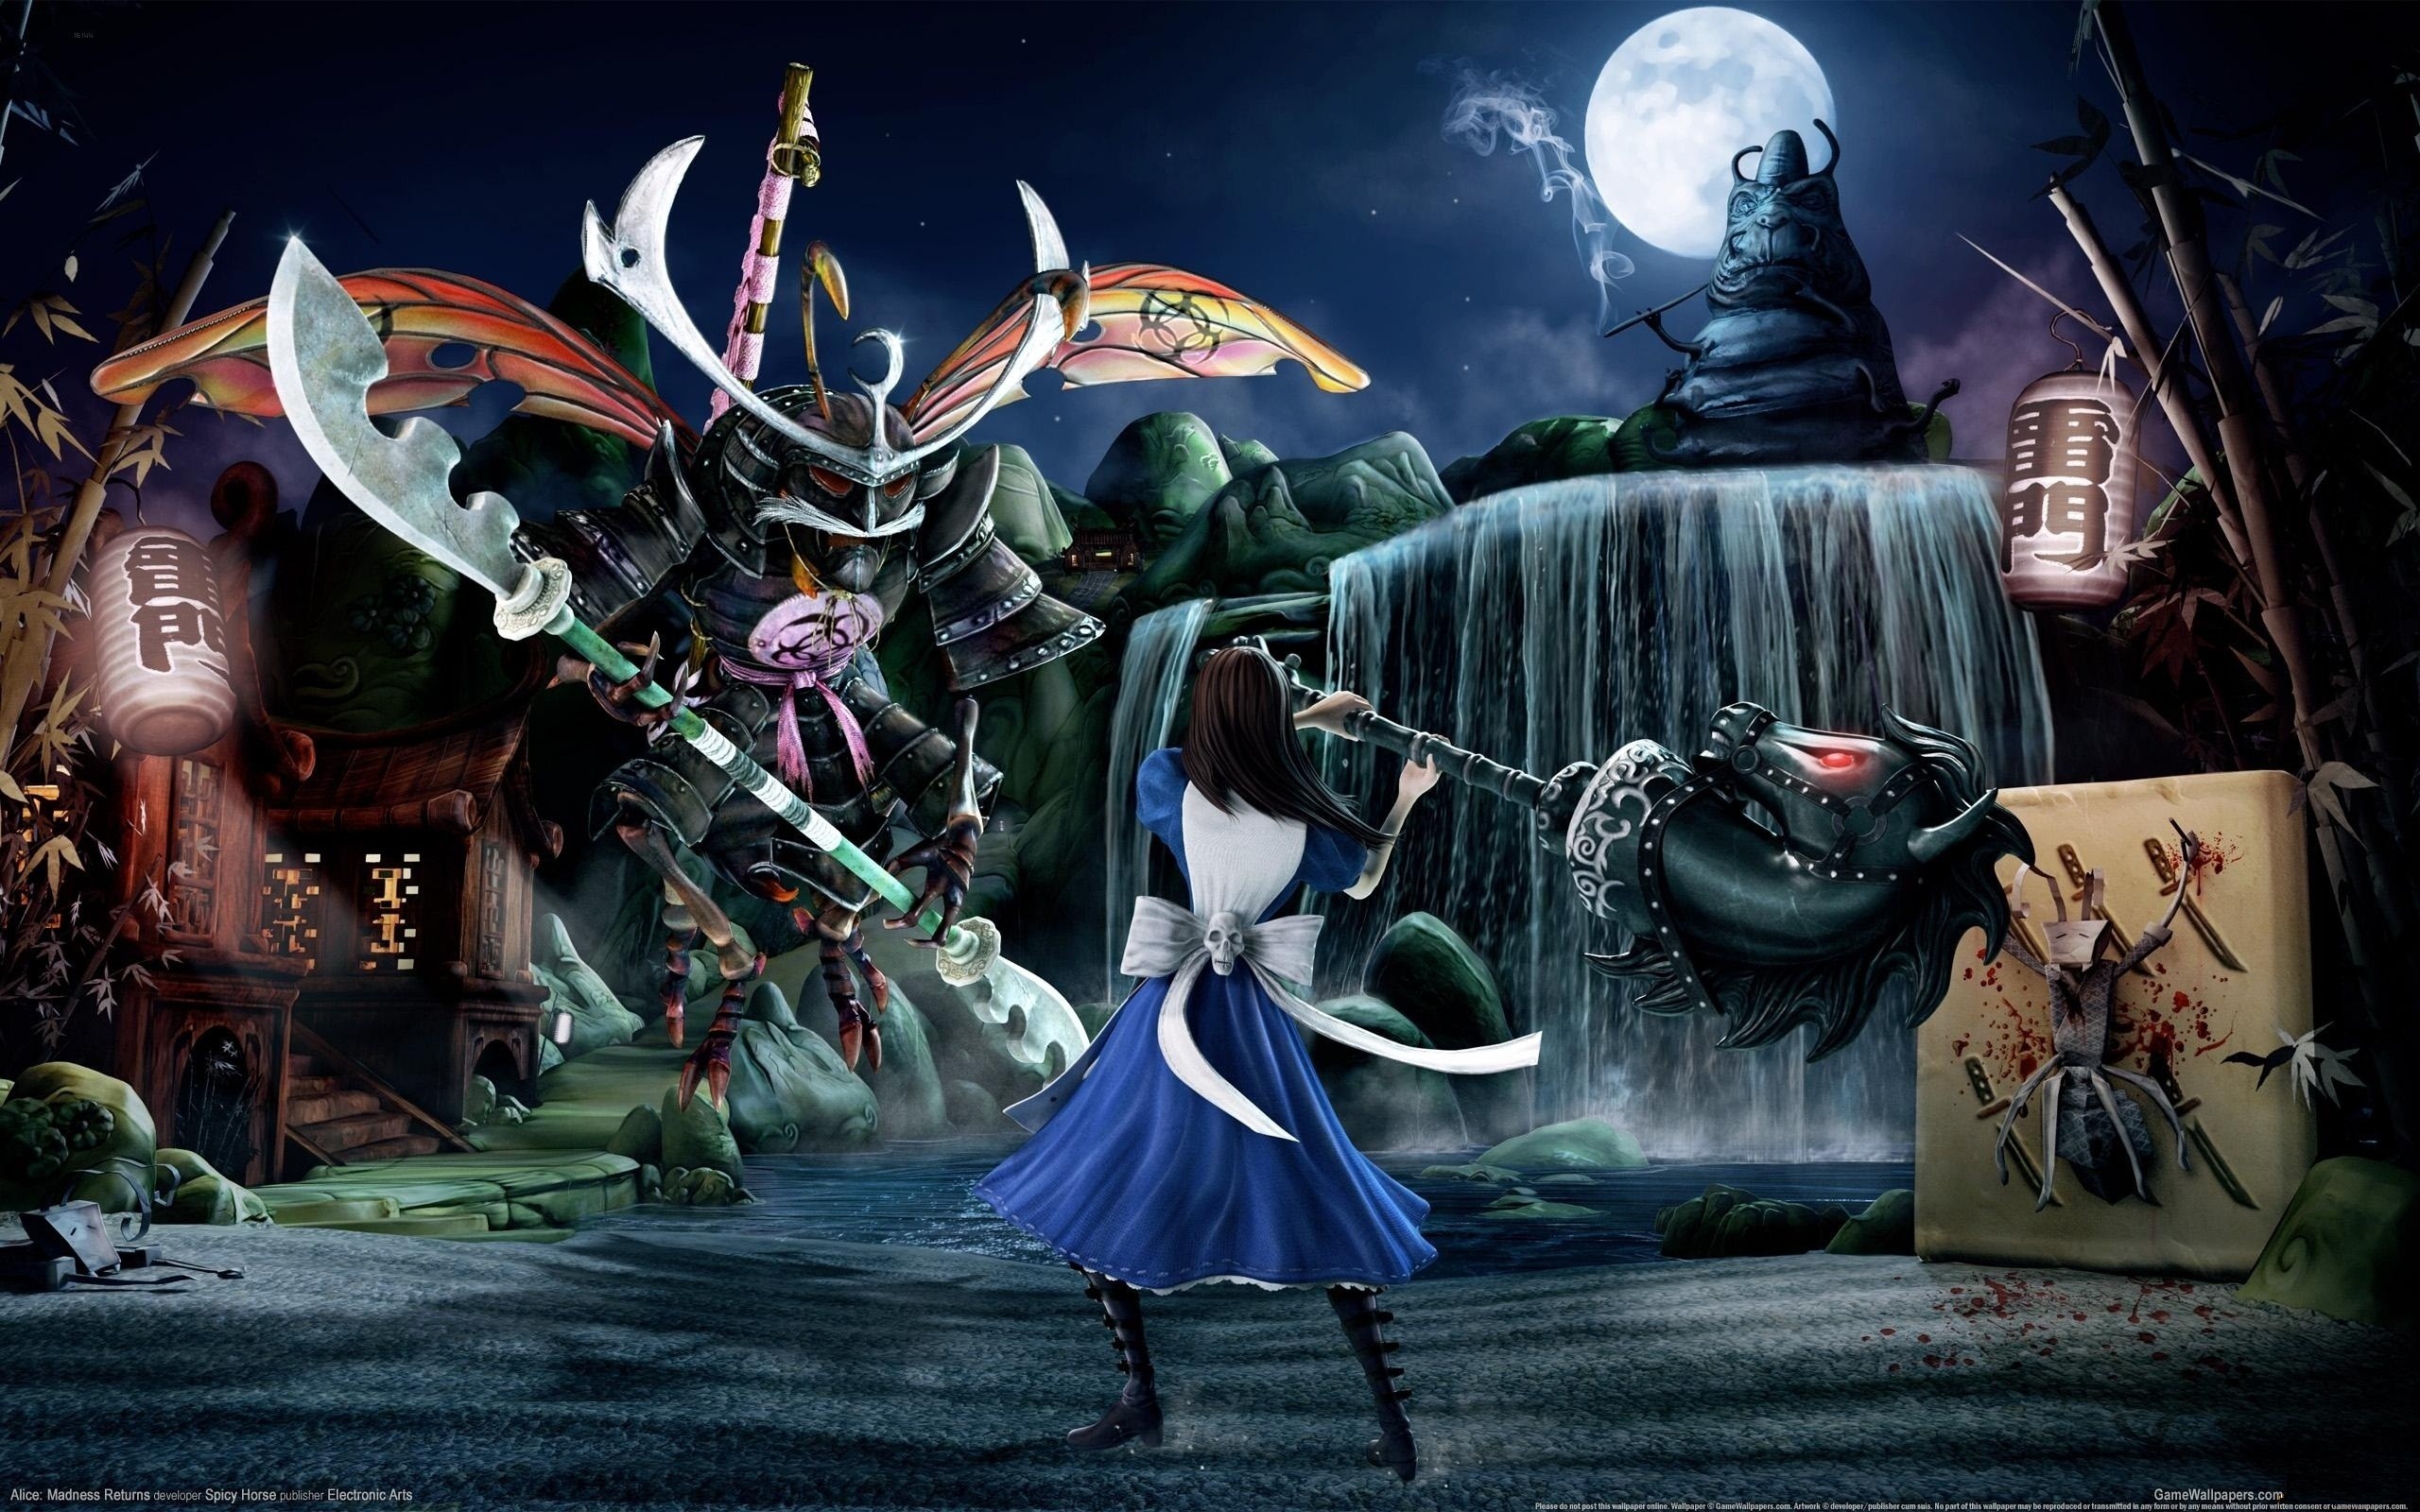 General 2560x1600 video games Alice: Madness Returns Alice Alice in Wonderland video game girls video game art EA Games book characters